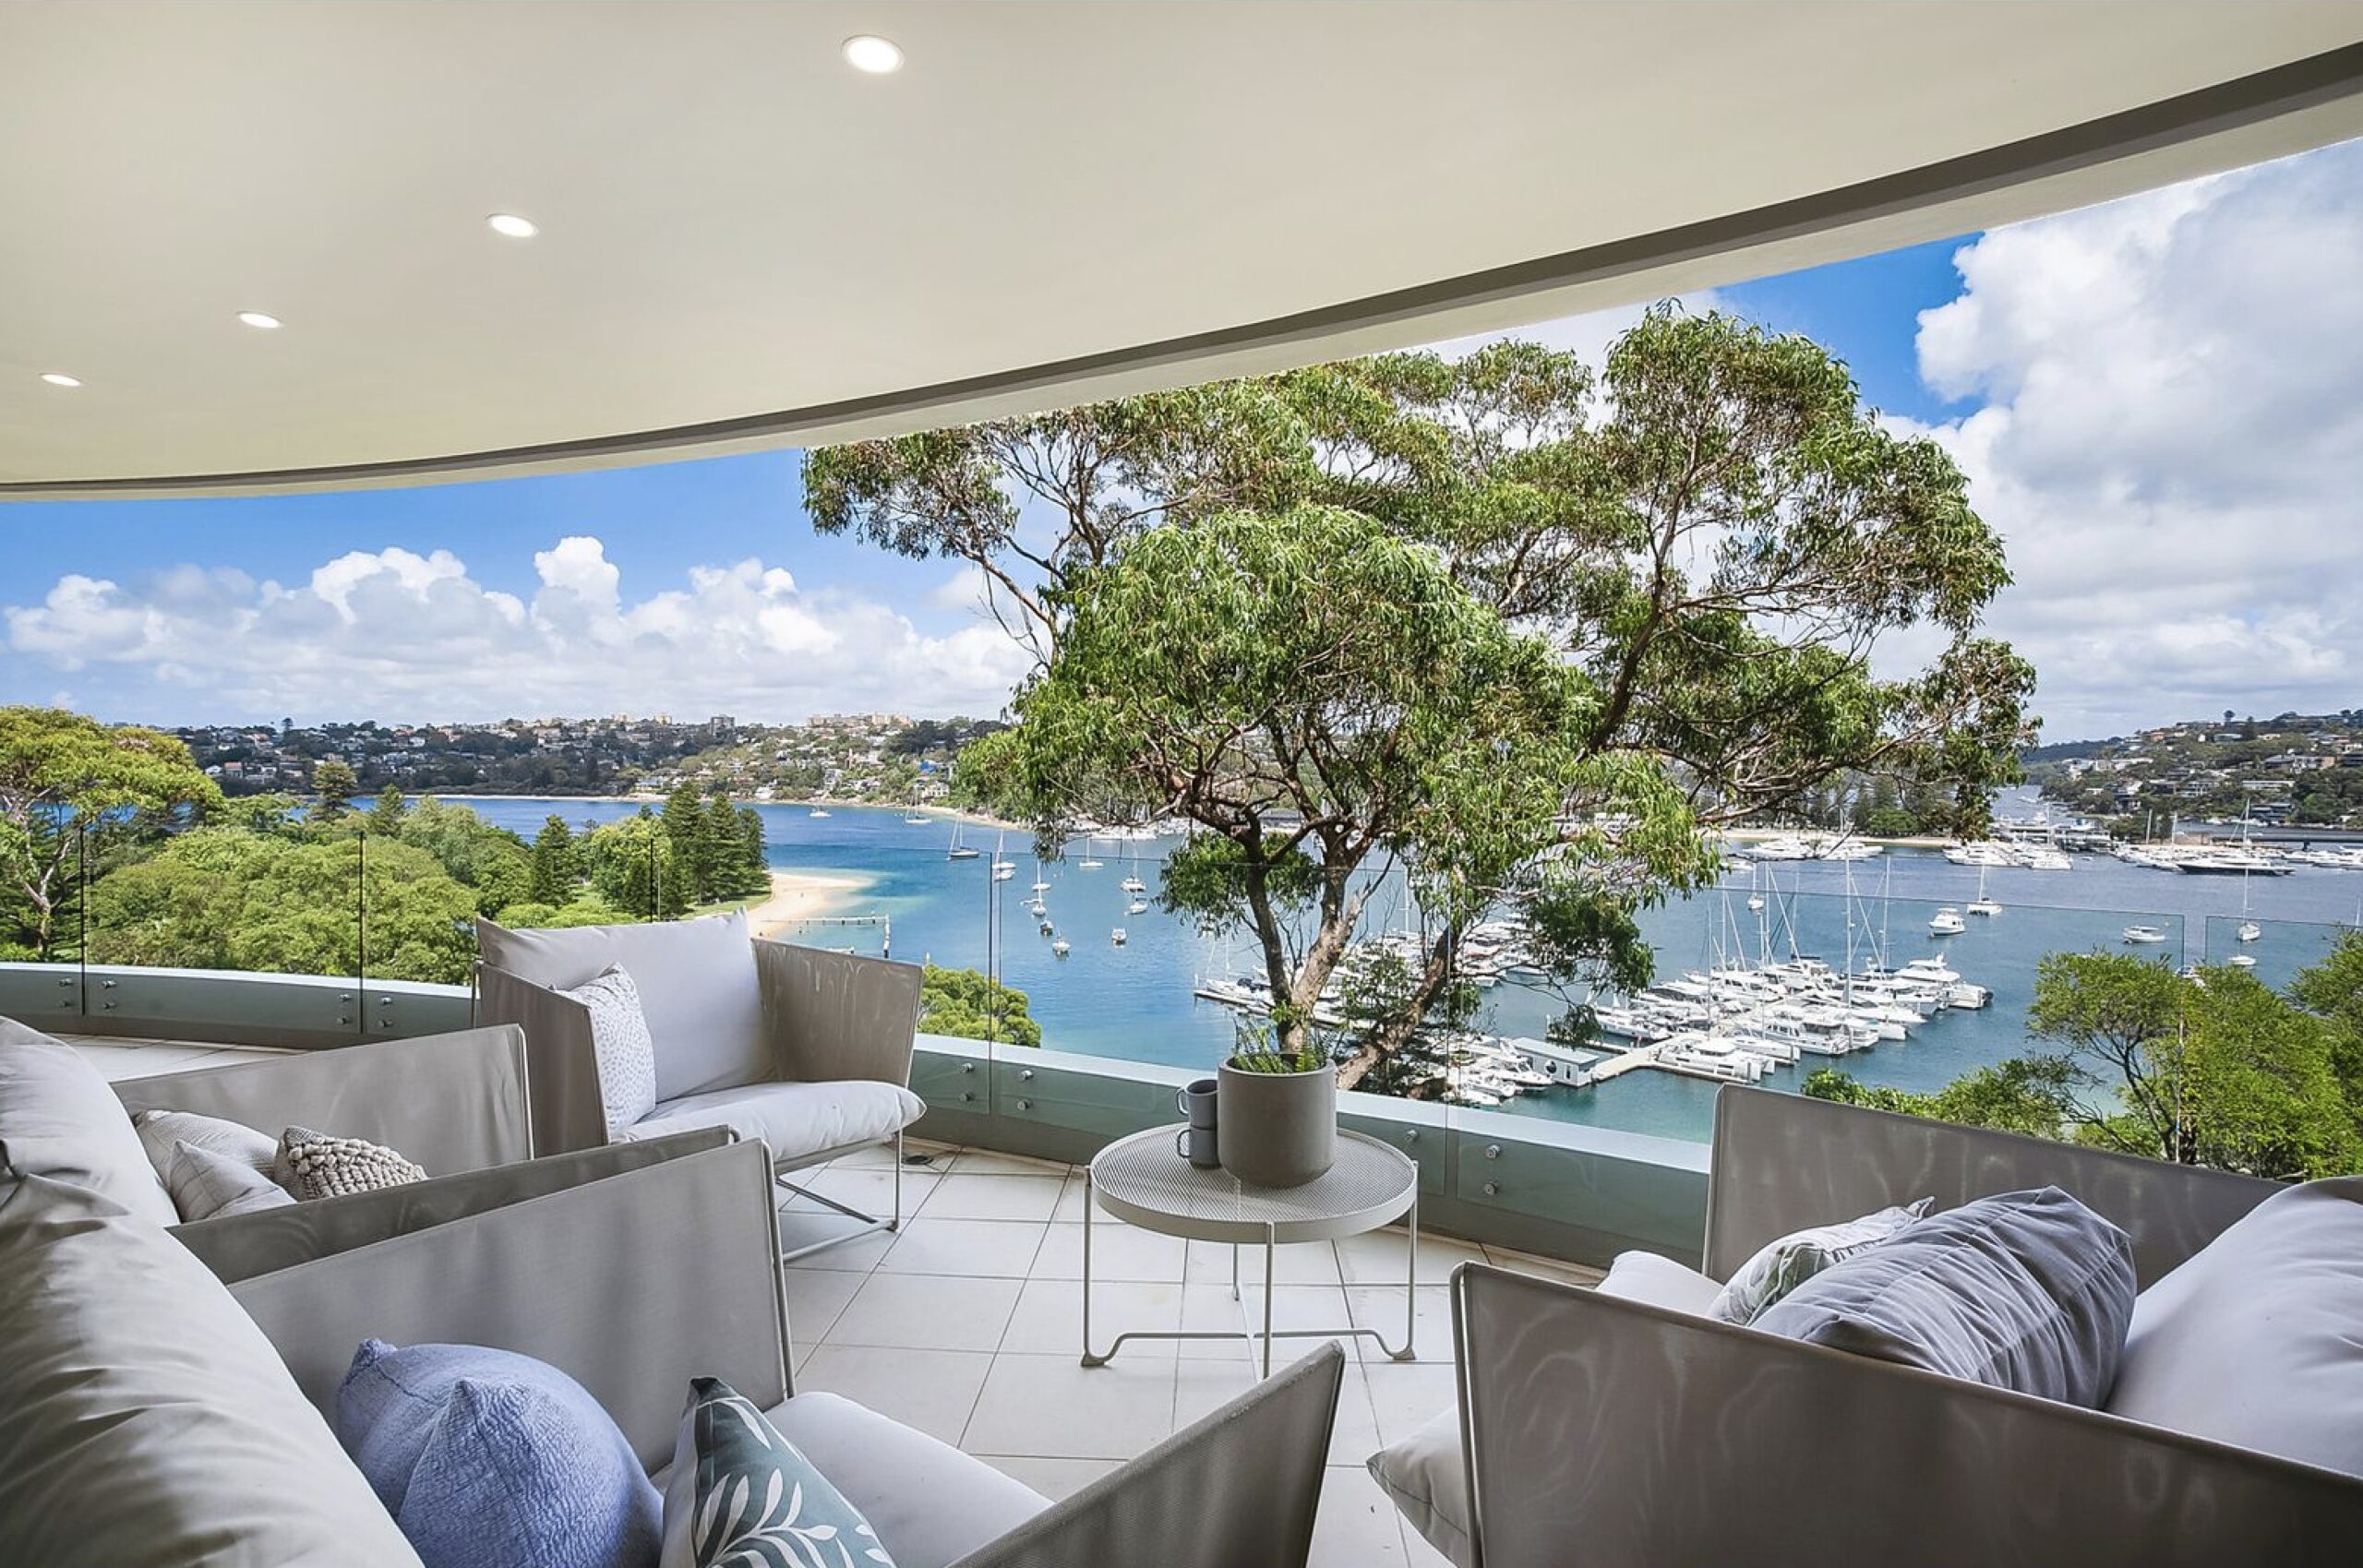 Buy your dream property with Buyers Agent Northern Beaches